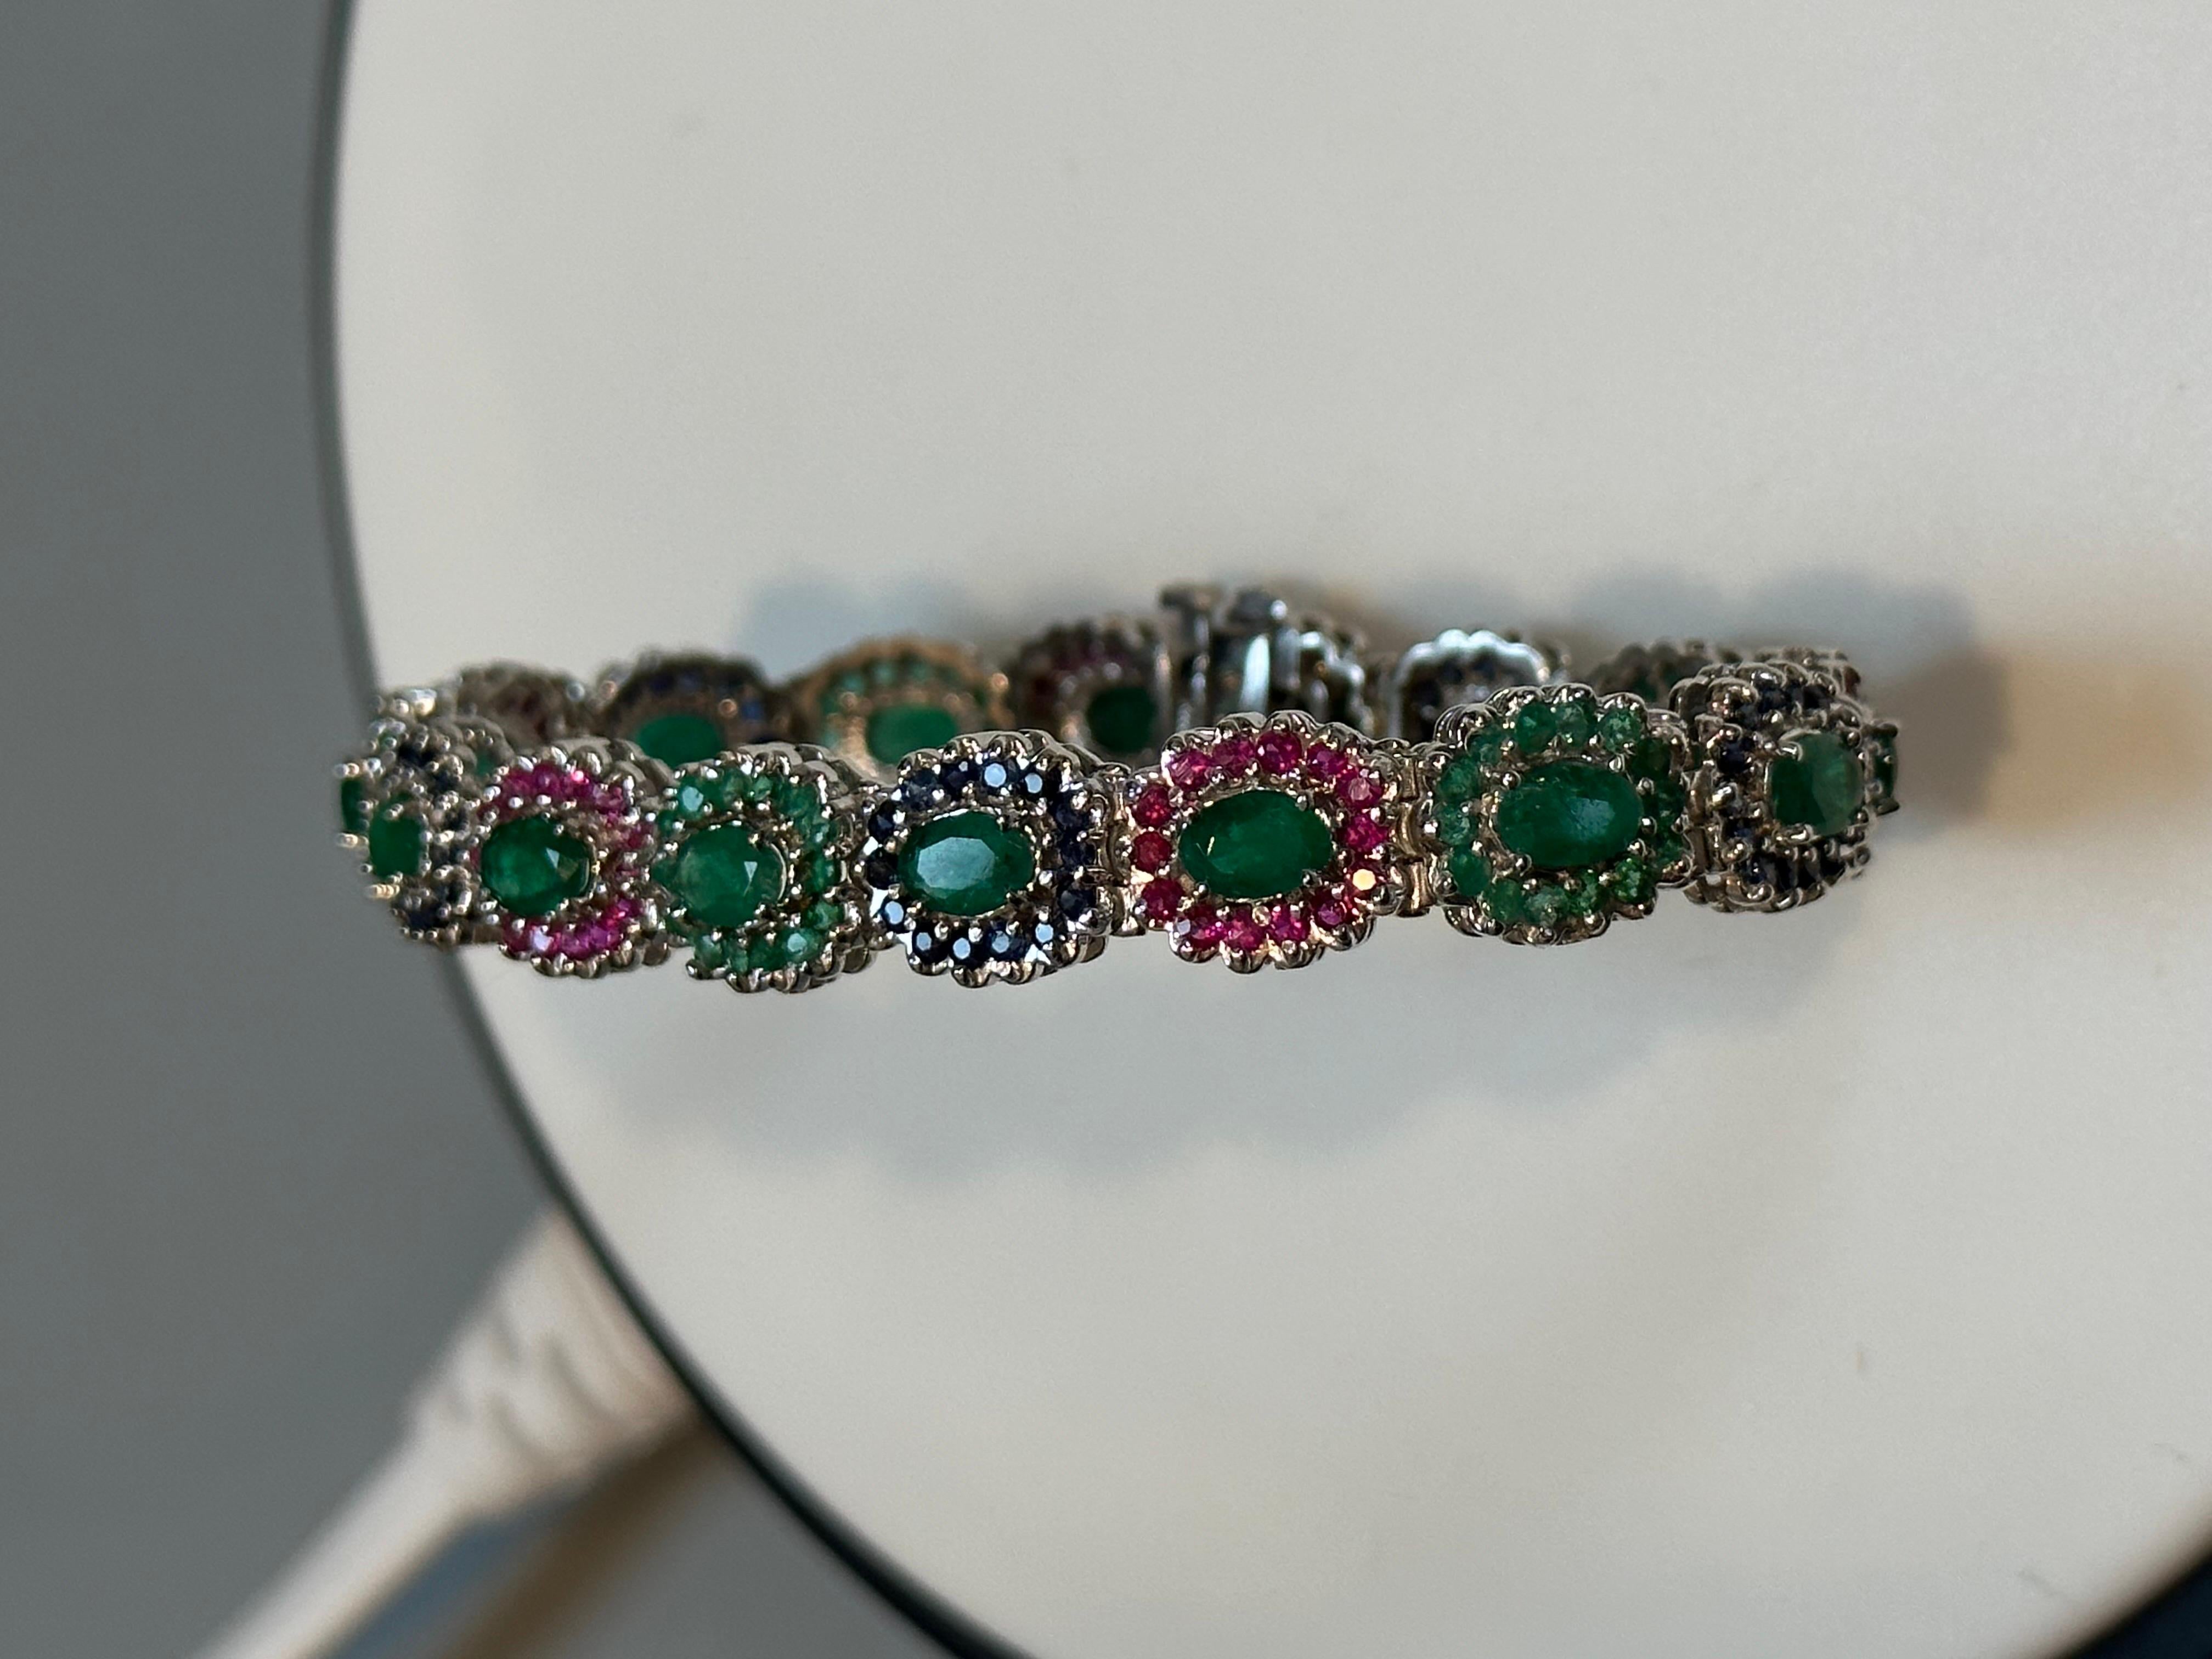 8 Ct Oval Cut Emerald & Ruby & Sapphire Tennis Bracelet 14 Kt White Gold 25.5Gm For Sale 8